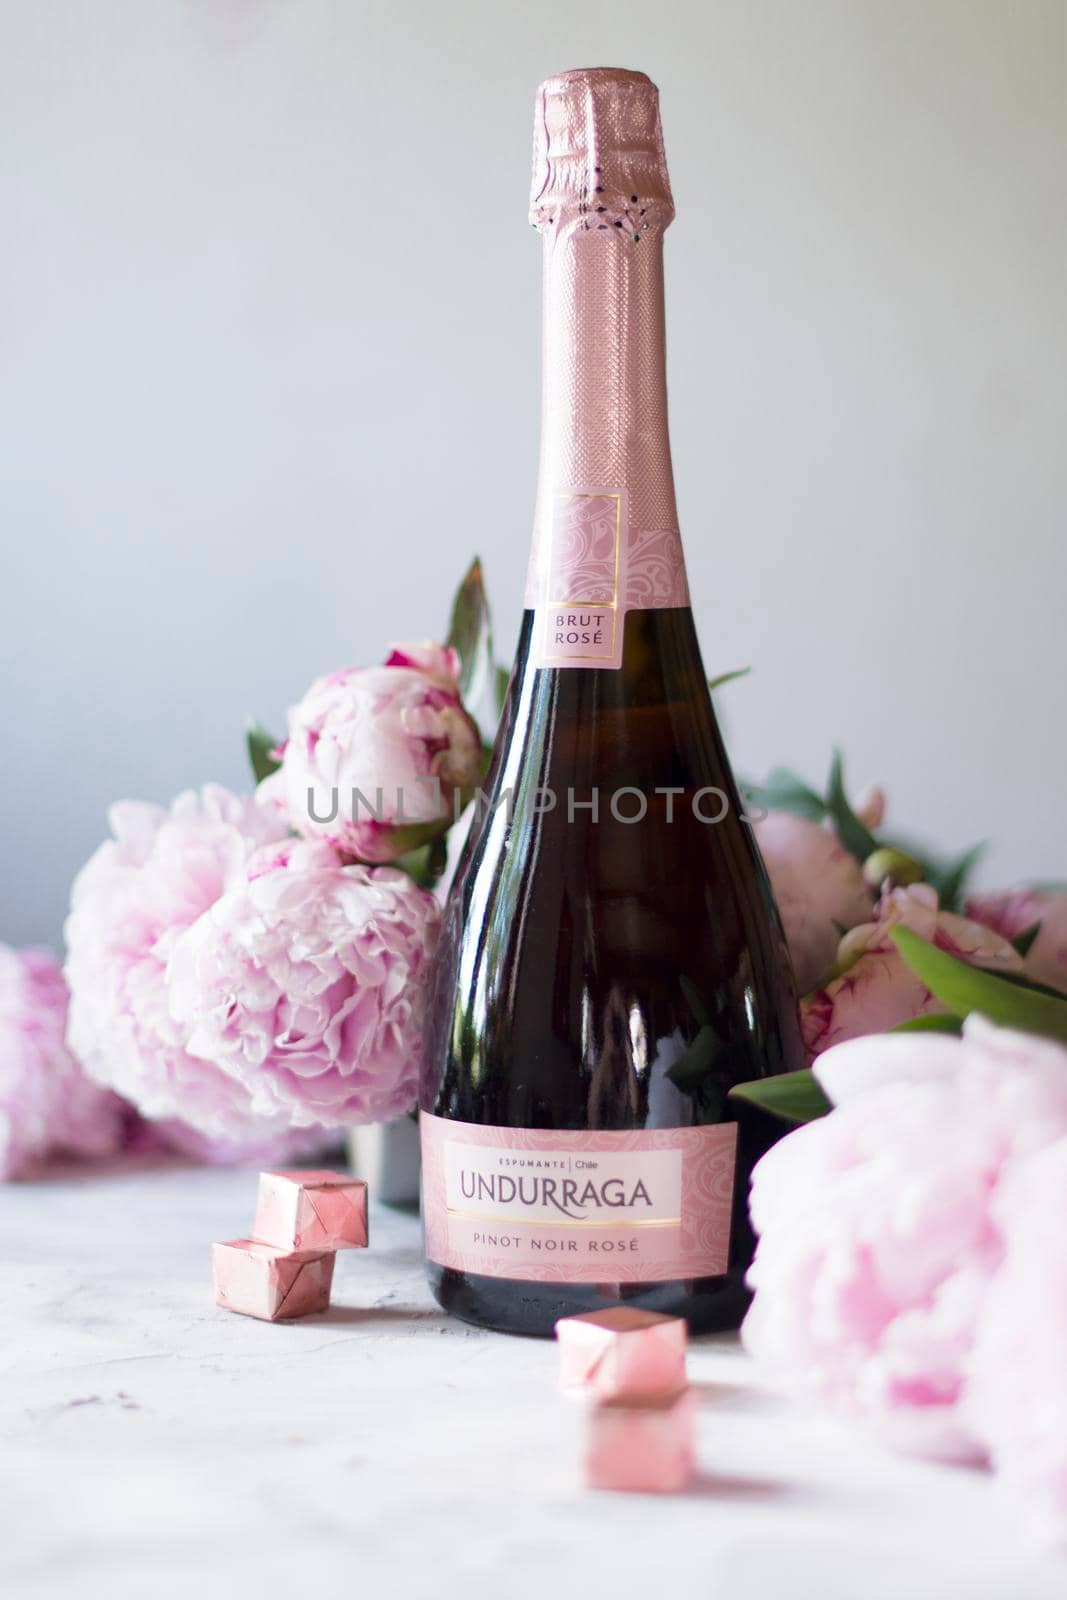 As, Belgium 8 June 2020, Undurraga pink dry champagne for birthday, mother's day gift, still life with pink peonies and chocolates in early spring. High quality photo